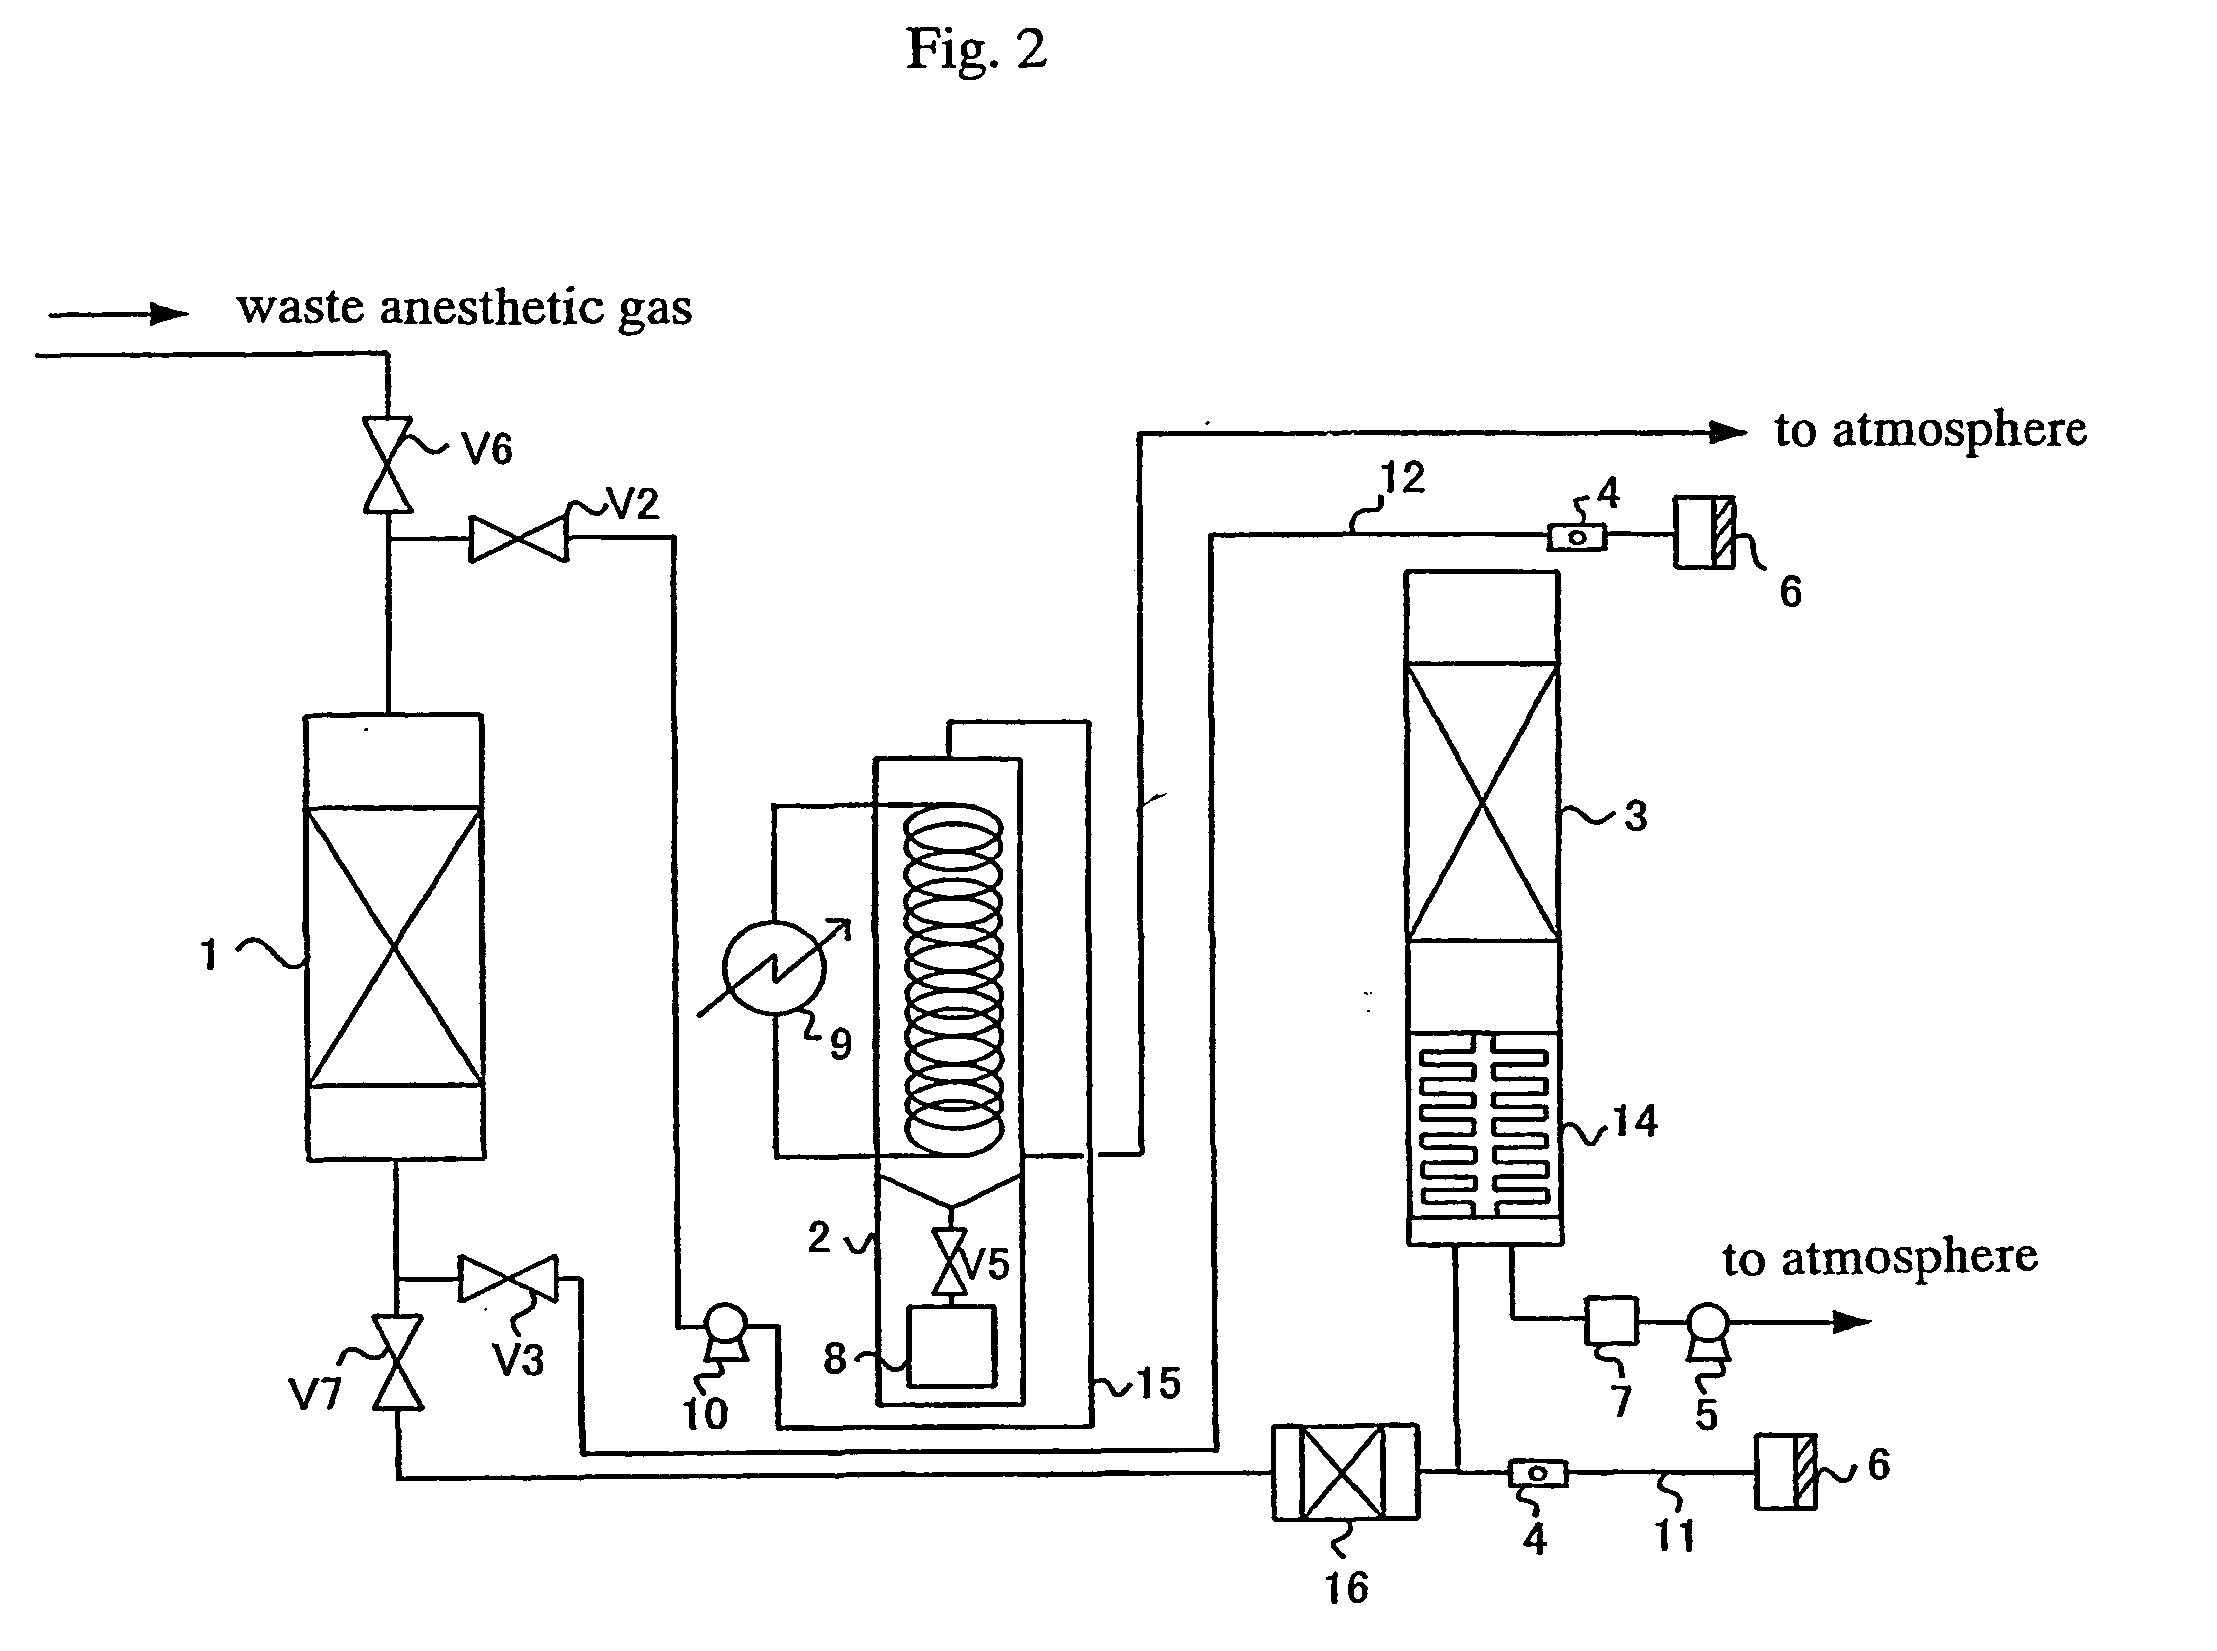 Process and apparatus for treating waste anesthetic gas